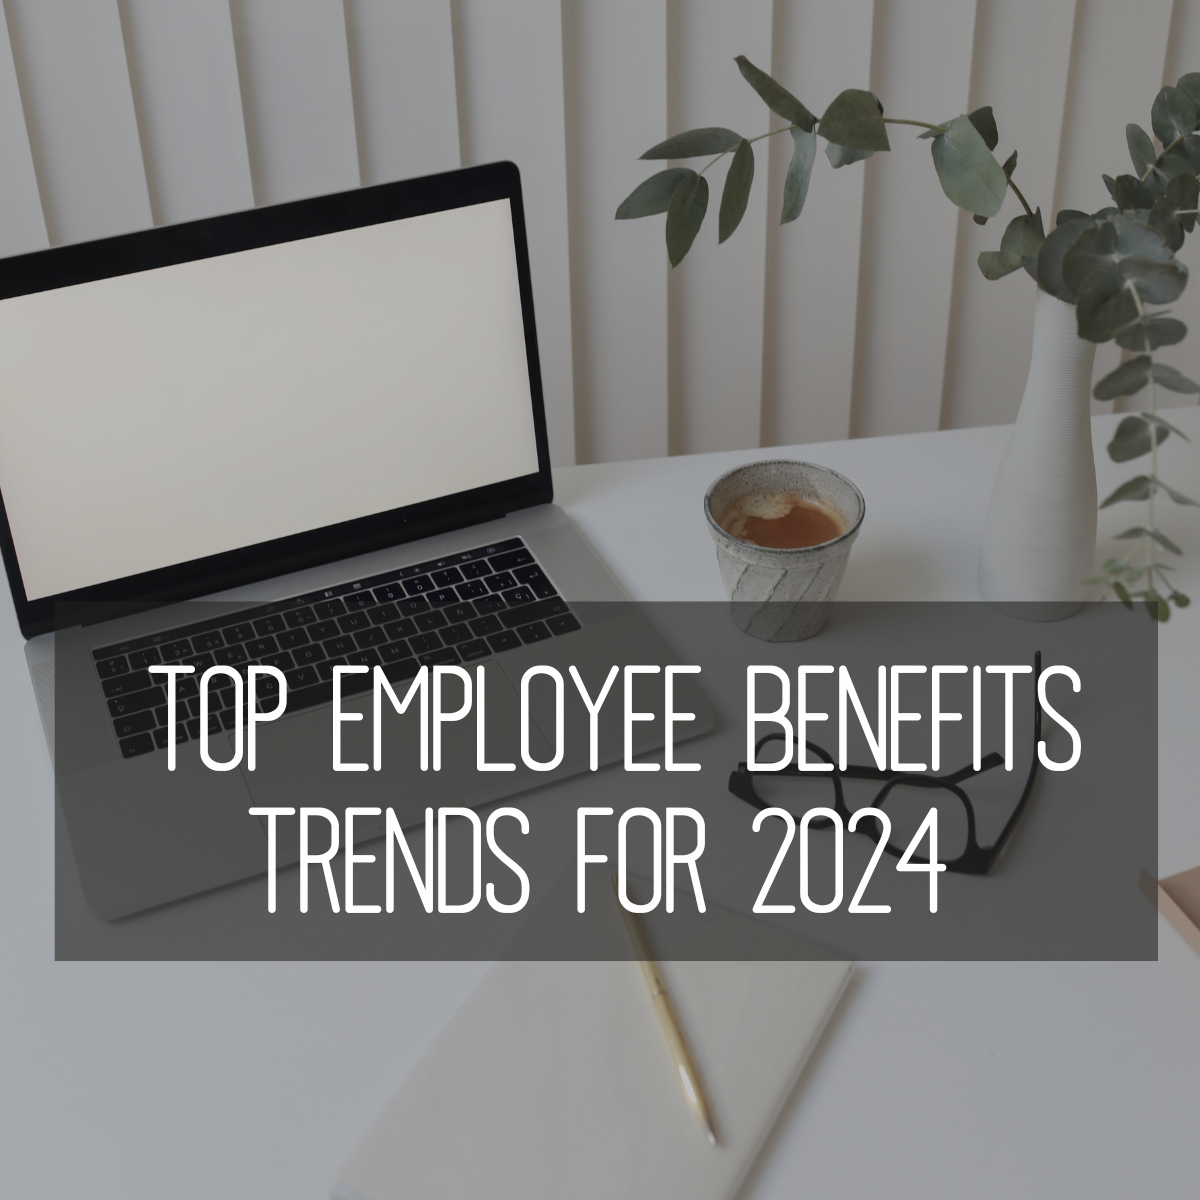 Top Benefit Trends for 2024 Image